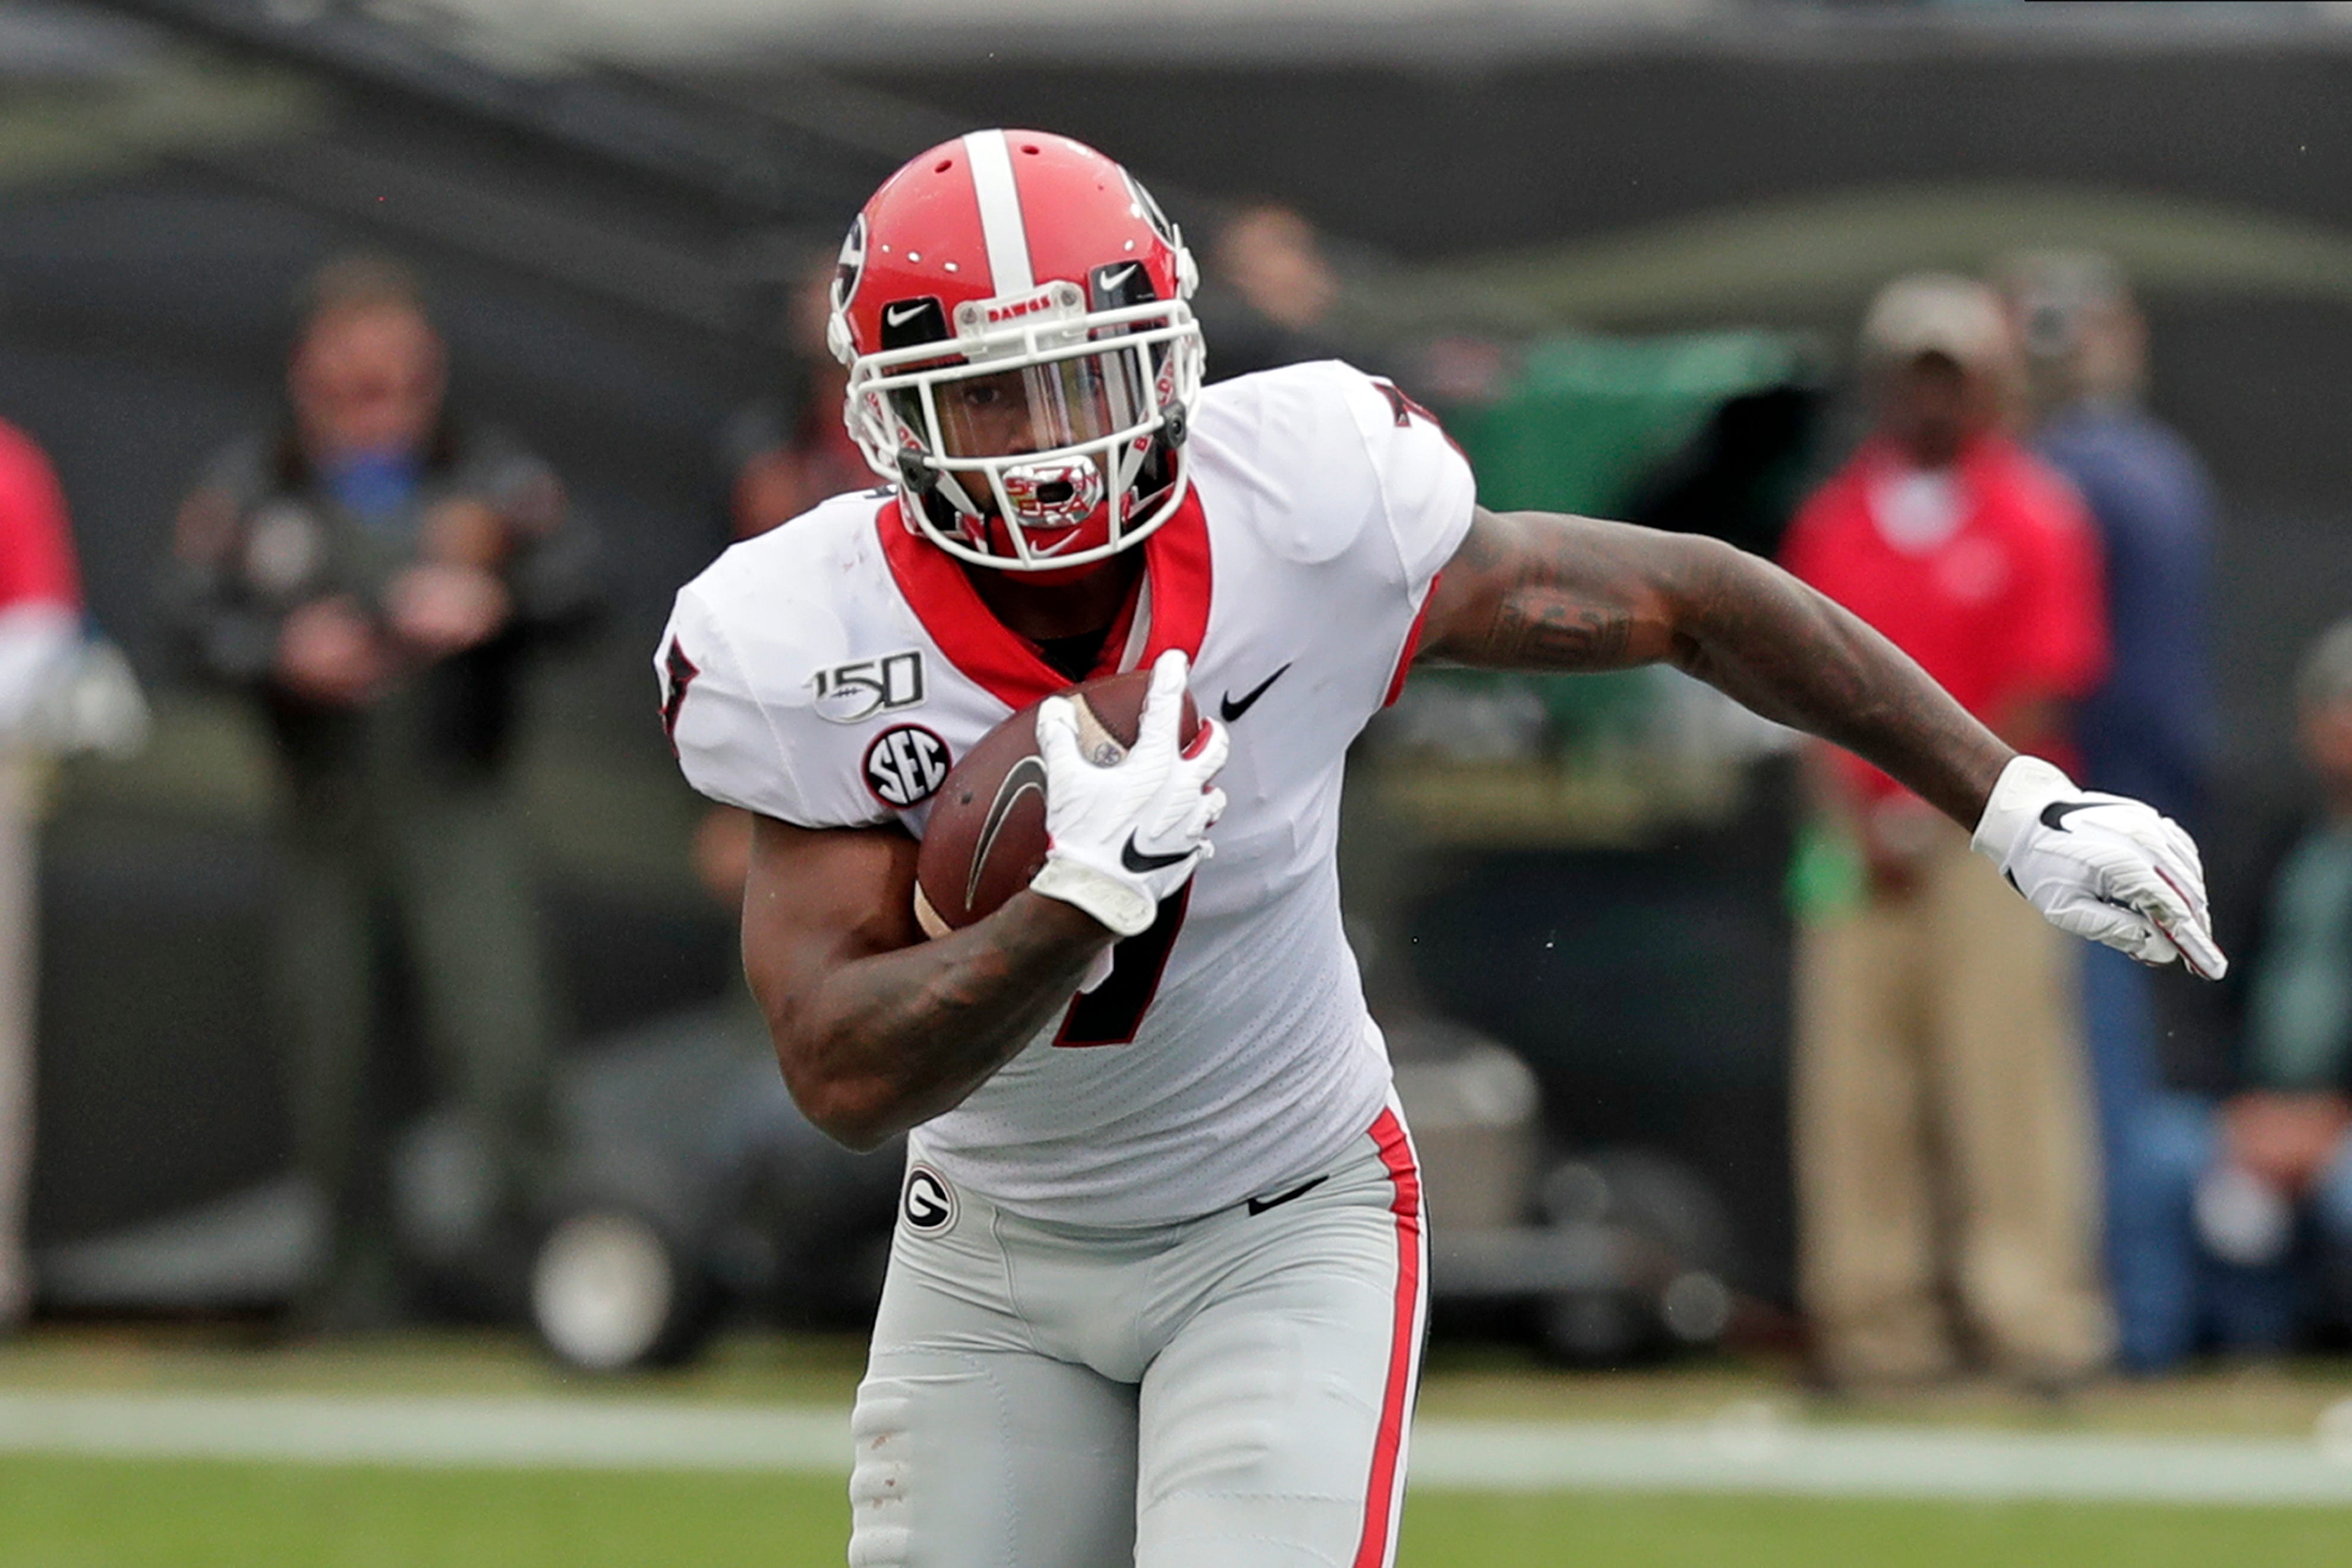 Georgia running back D'Andre Swift runs against Florida during the first half in 2019.